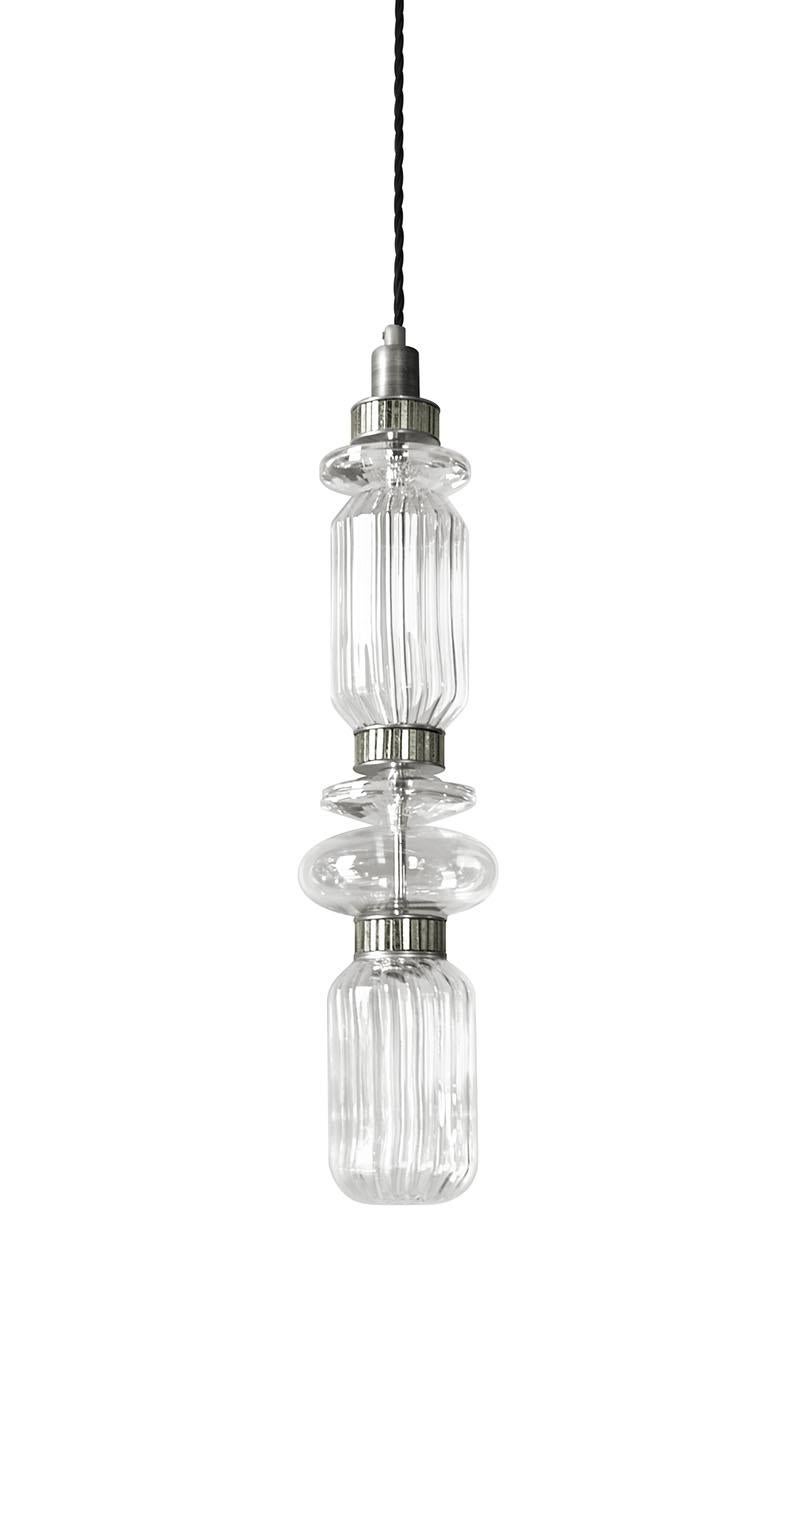 Italian Ceiling Lamp with Pyrex Glass in Amber-Smoked, Decorative Bronzed or Chrome For Sale